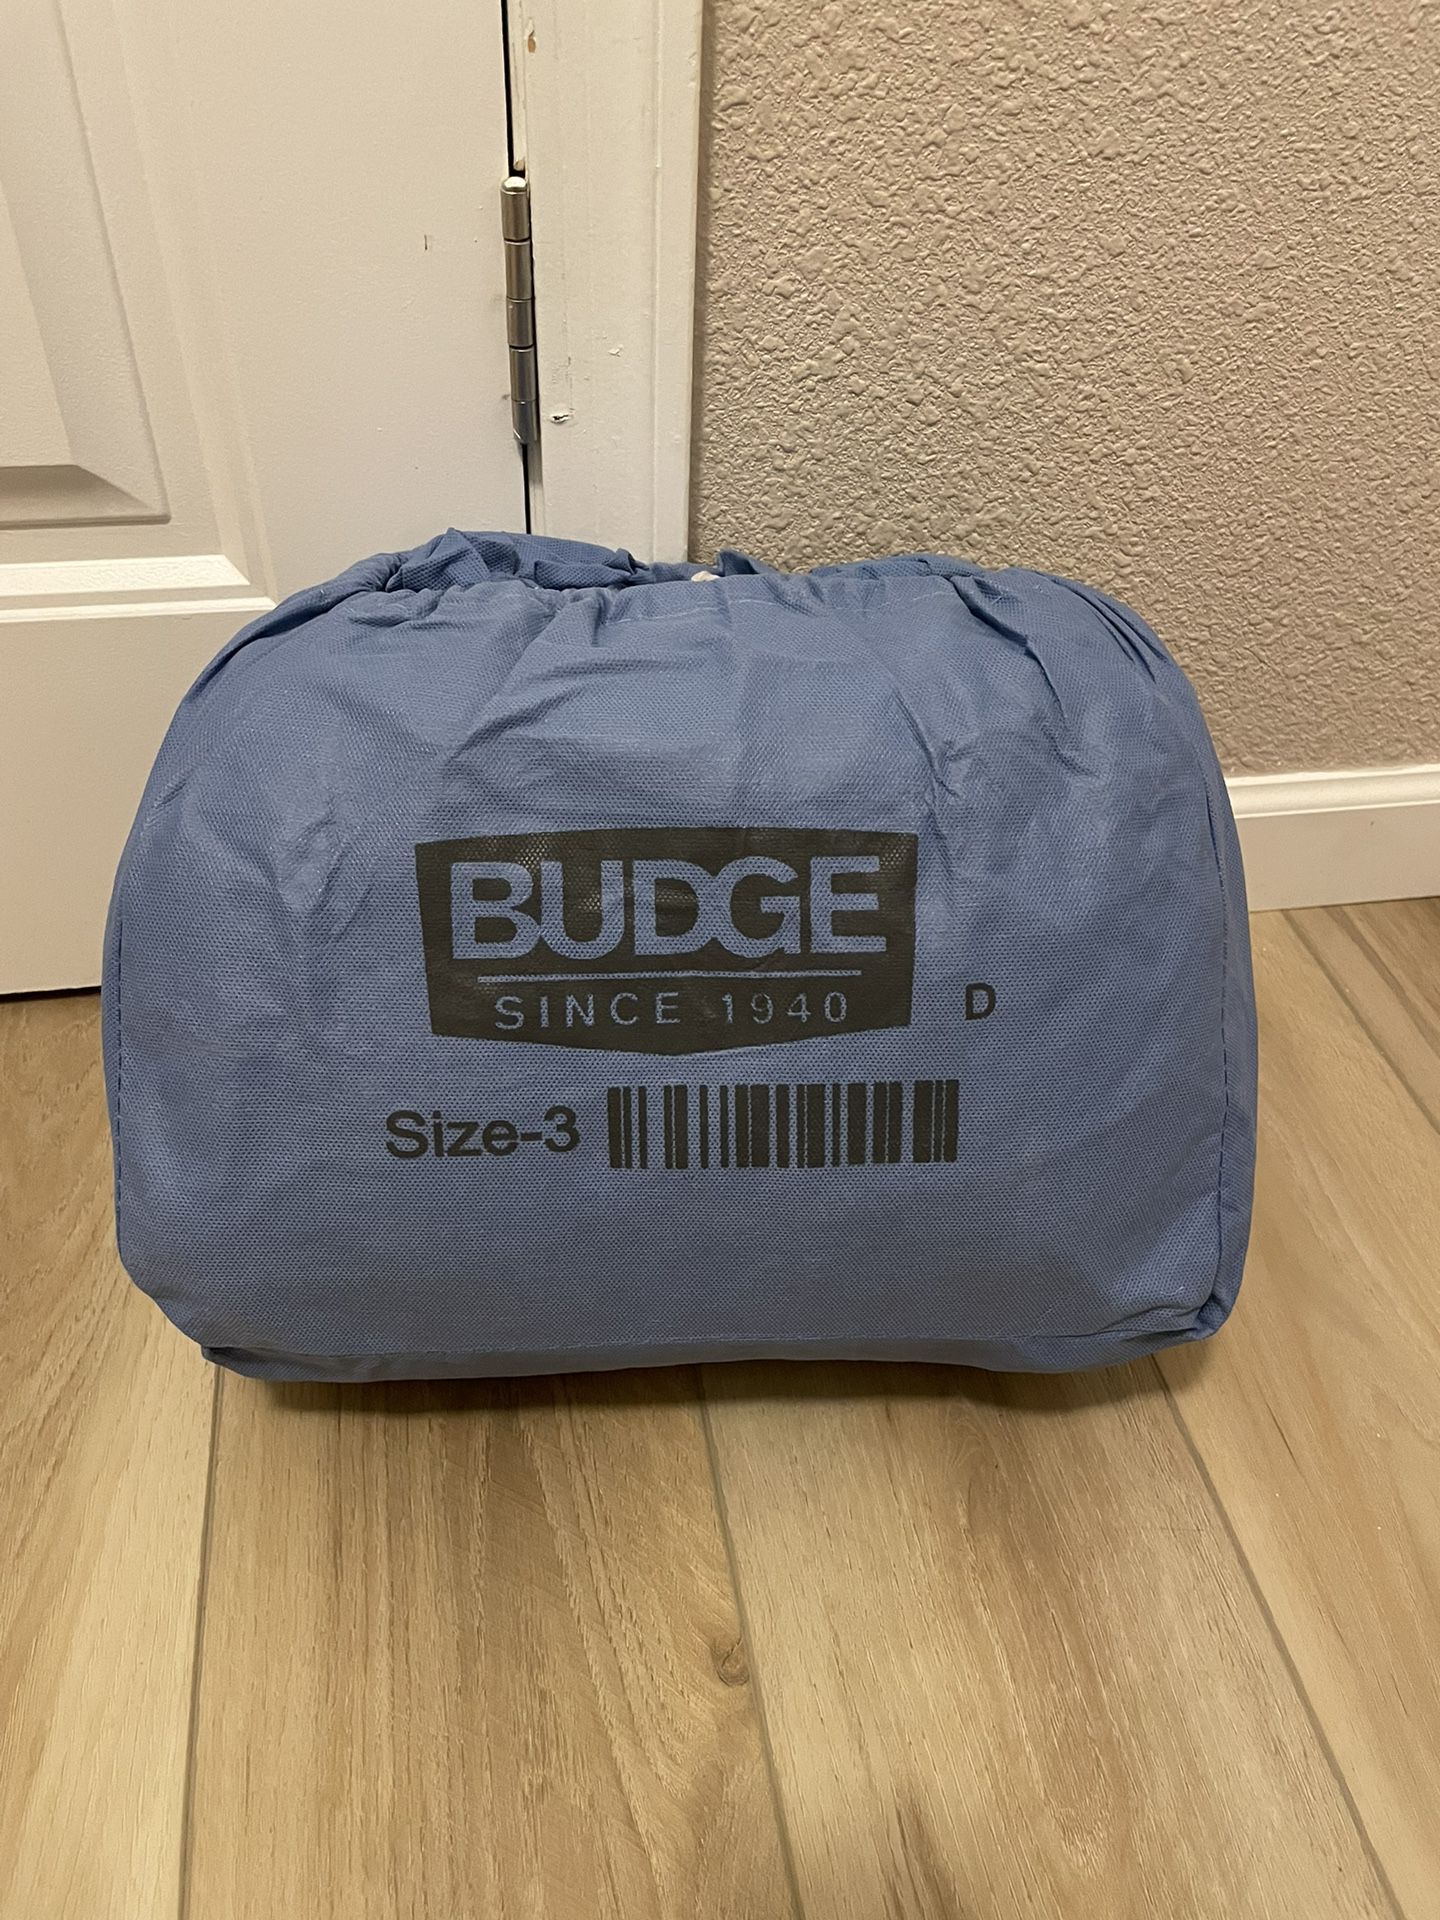 Budge Car Cover Size 3